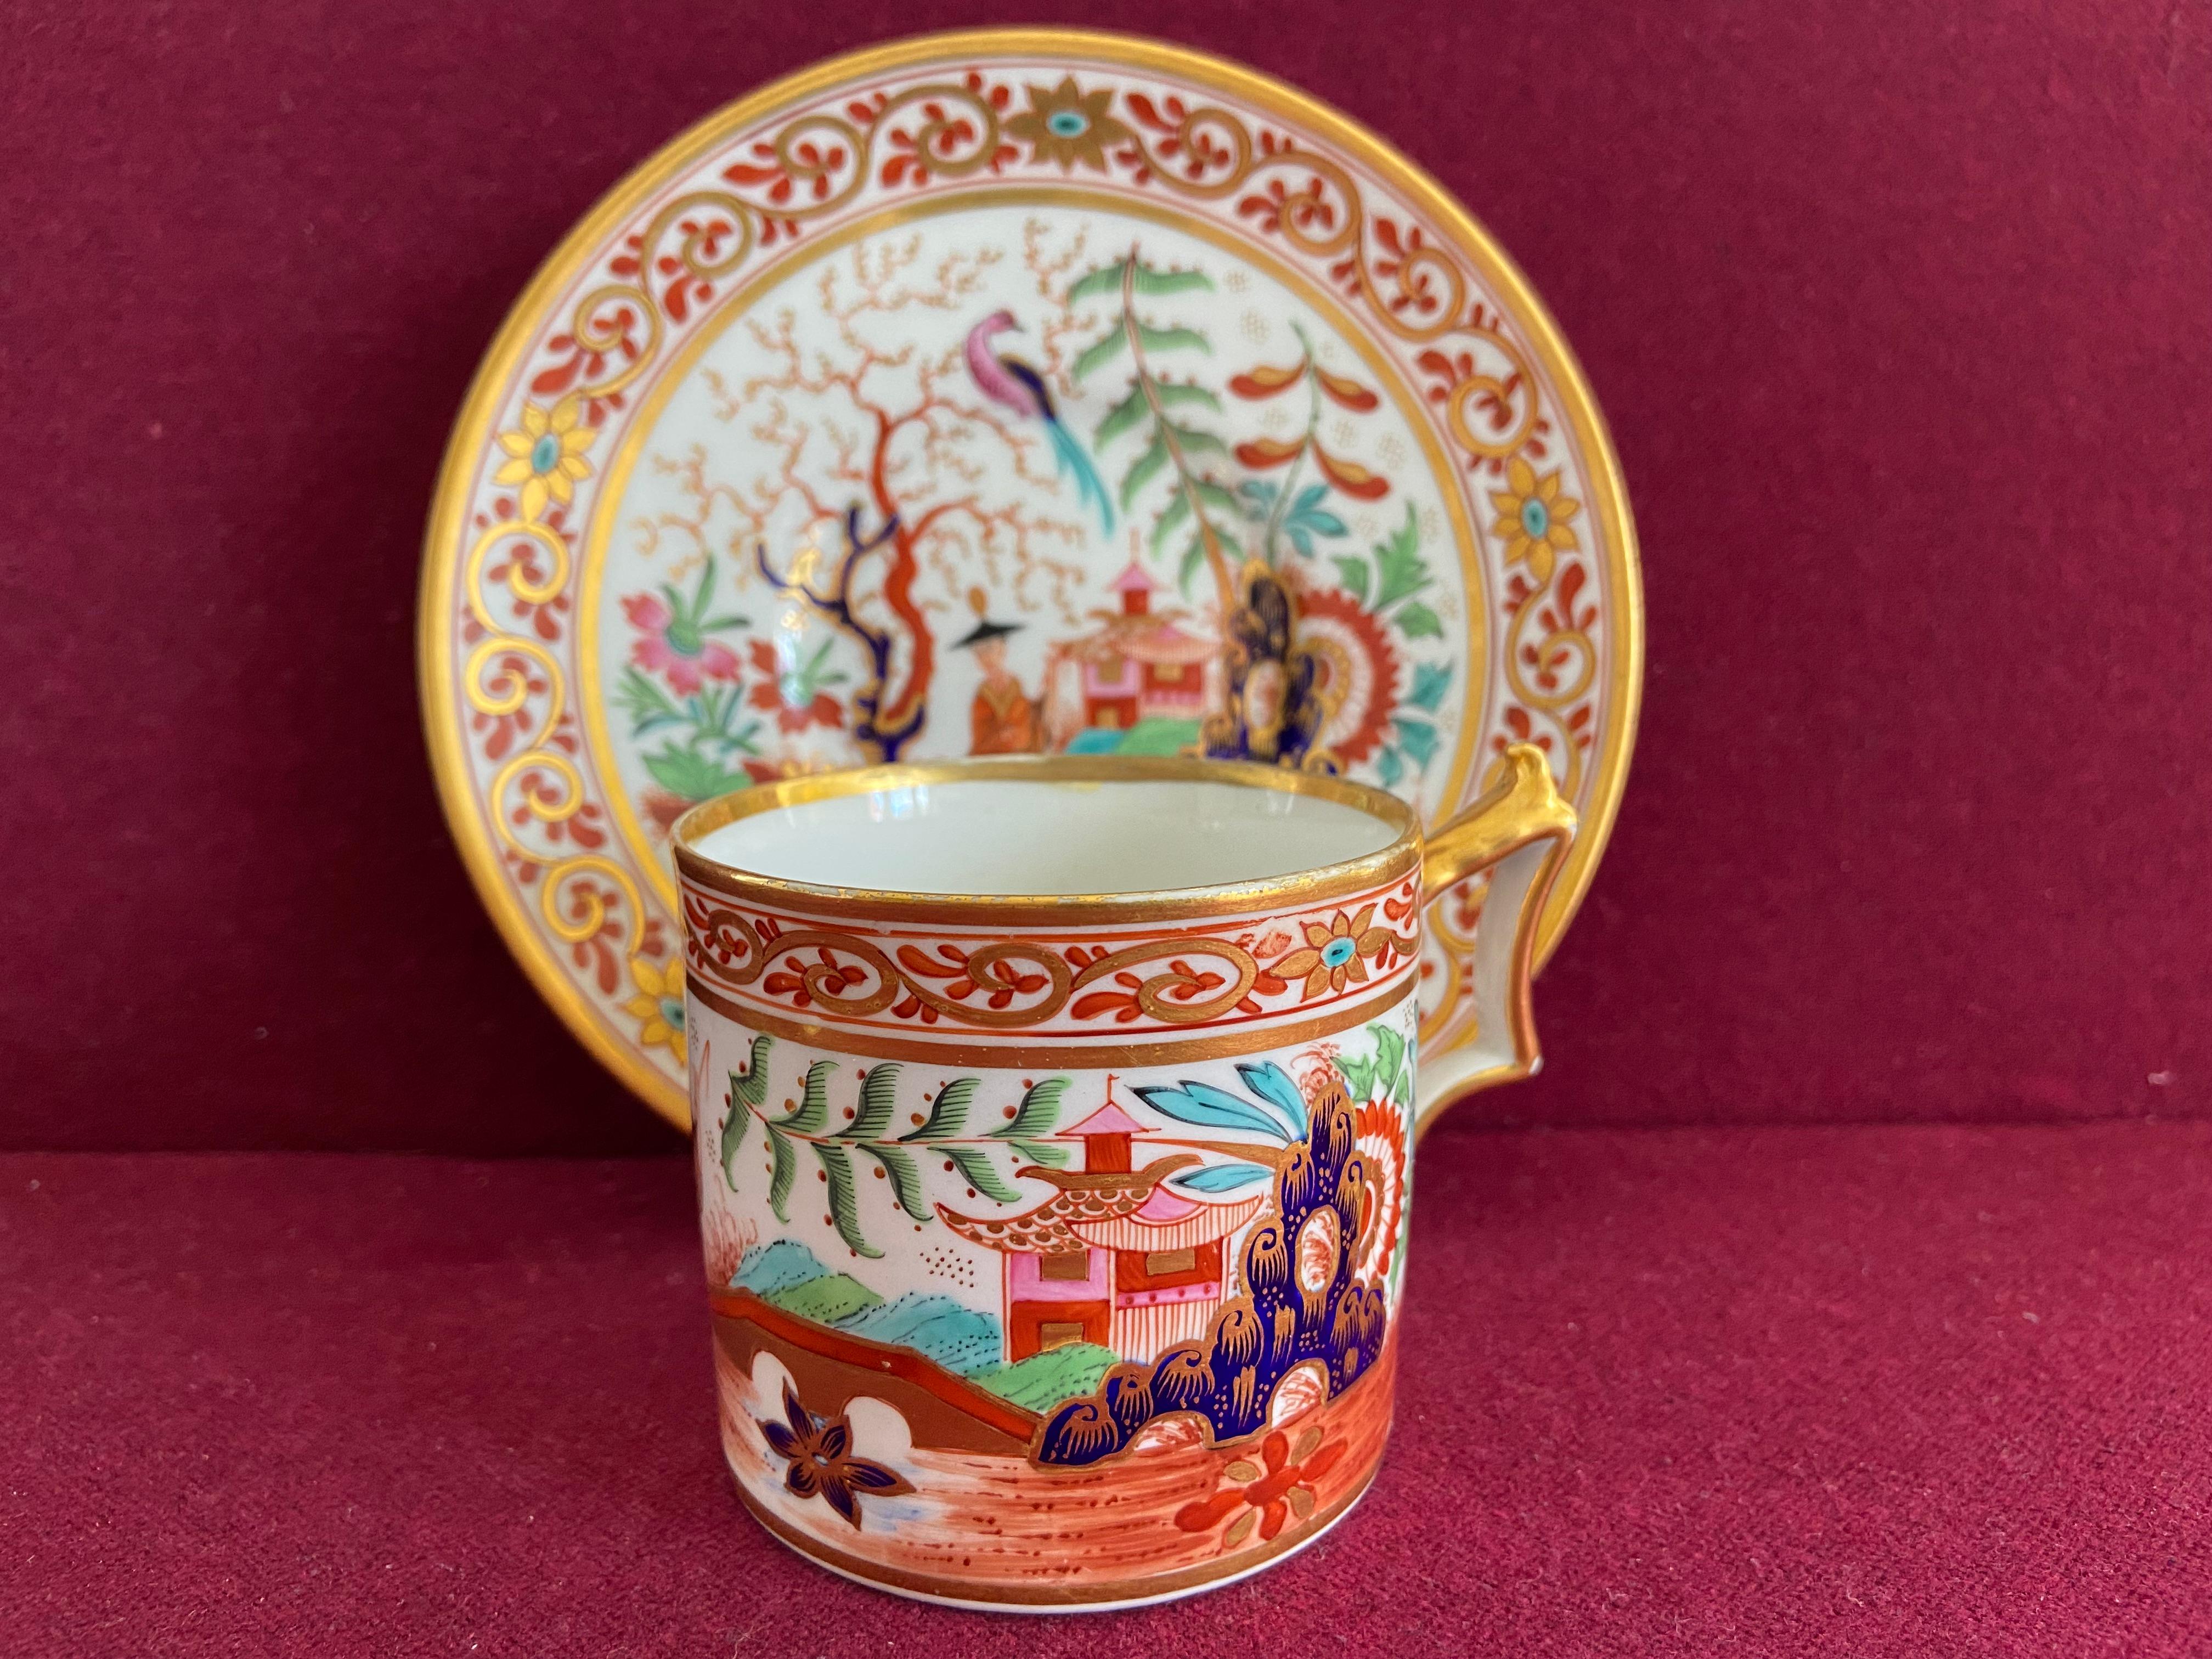 A Flight Barr and Barr Worcester Porcelain coffee can and Saucer c.1815-1820. Finely decorated with a bold Japan pattern.

Condition: Excellent.